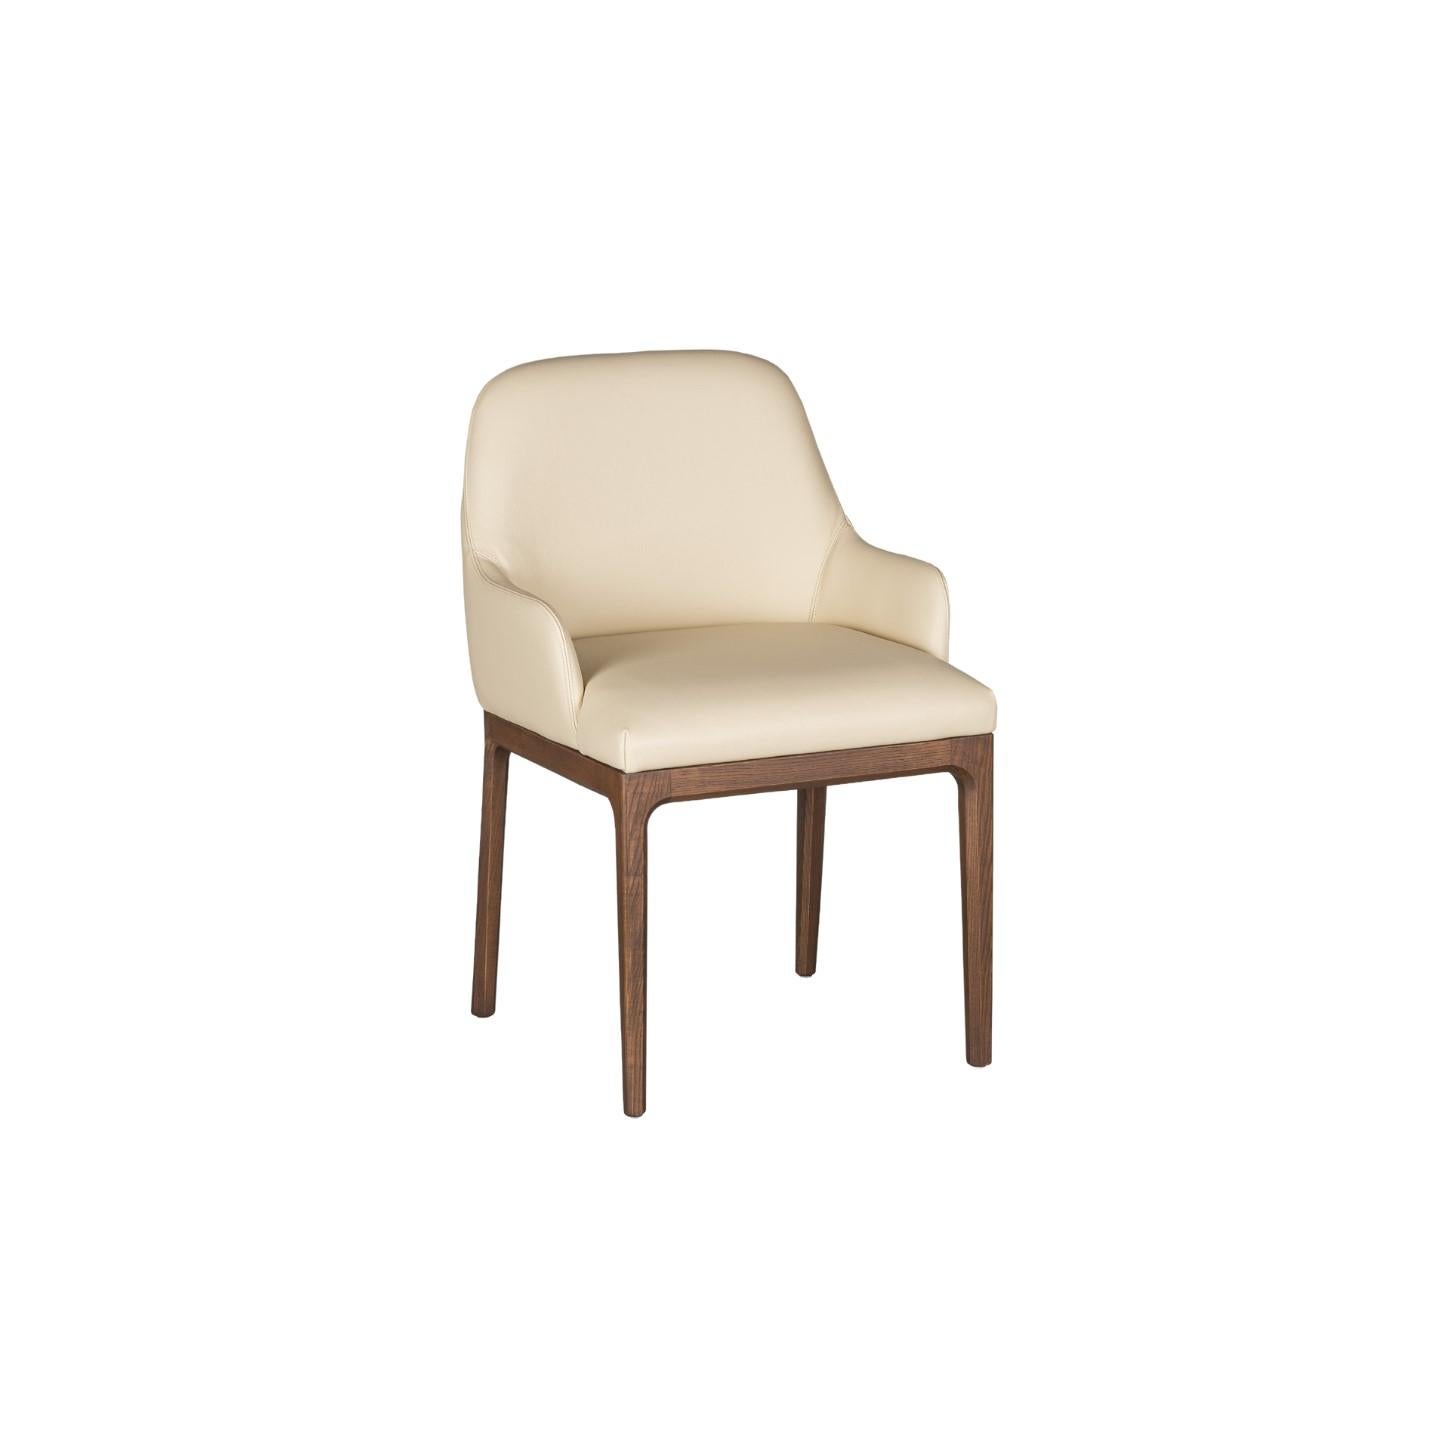 Contemporary style Bellagio armchair made of ashwood with leather or fabrics upholstered seat.
Design Libero Rutilo